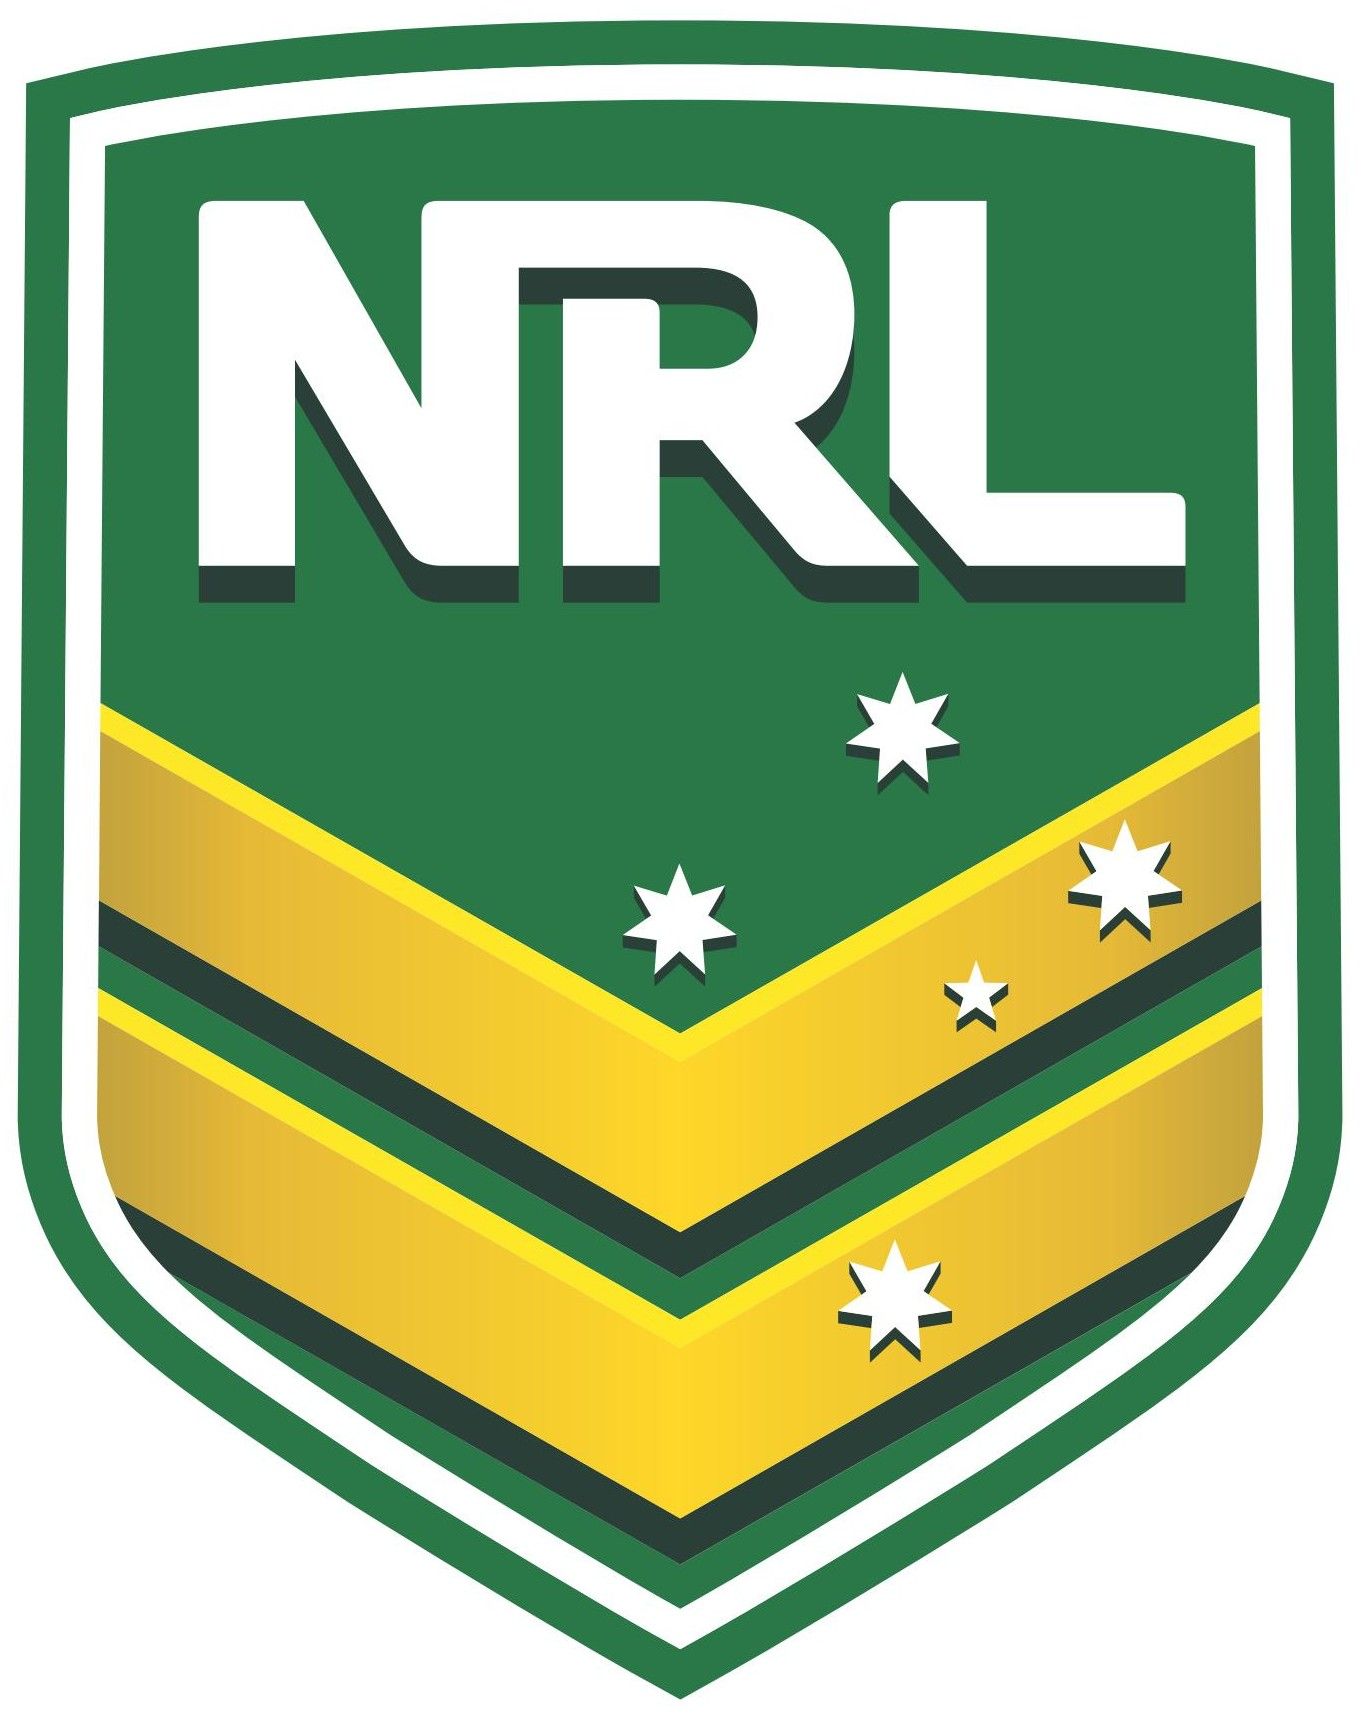 Ball clipart rugby league. Nrl logo national intergovernmental